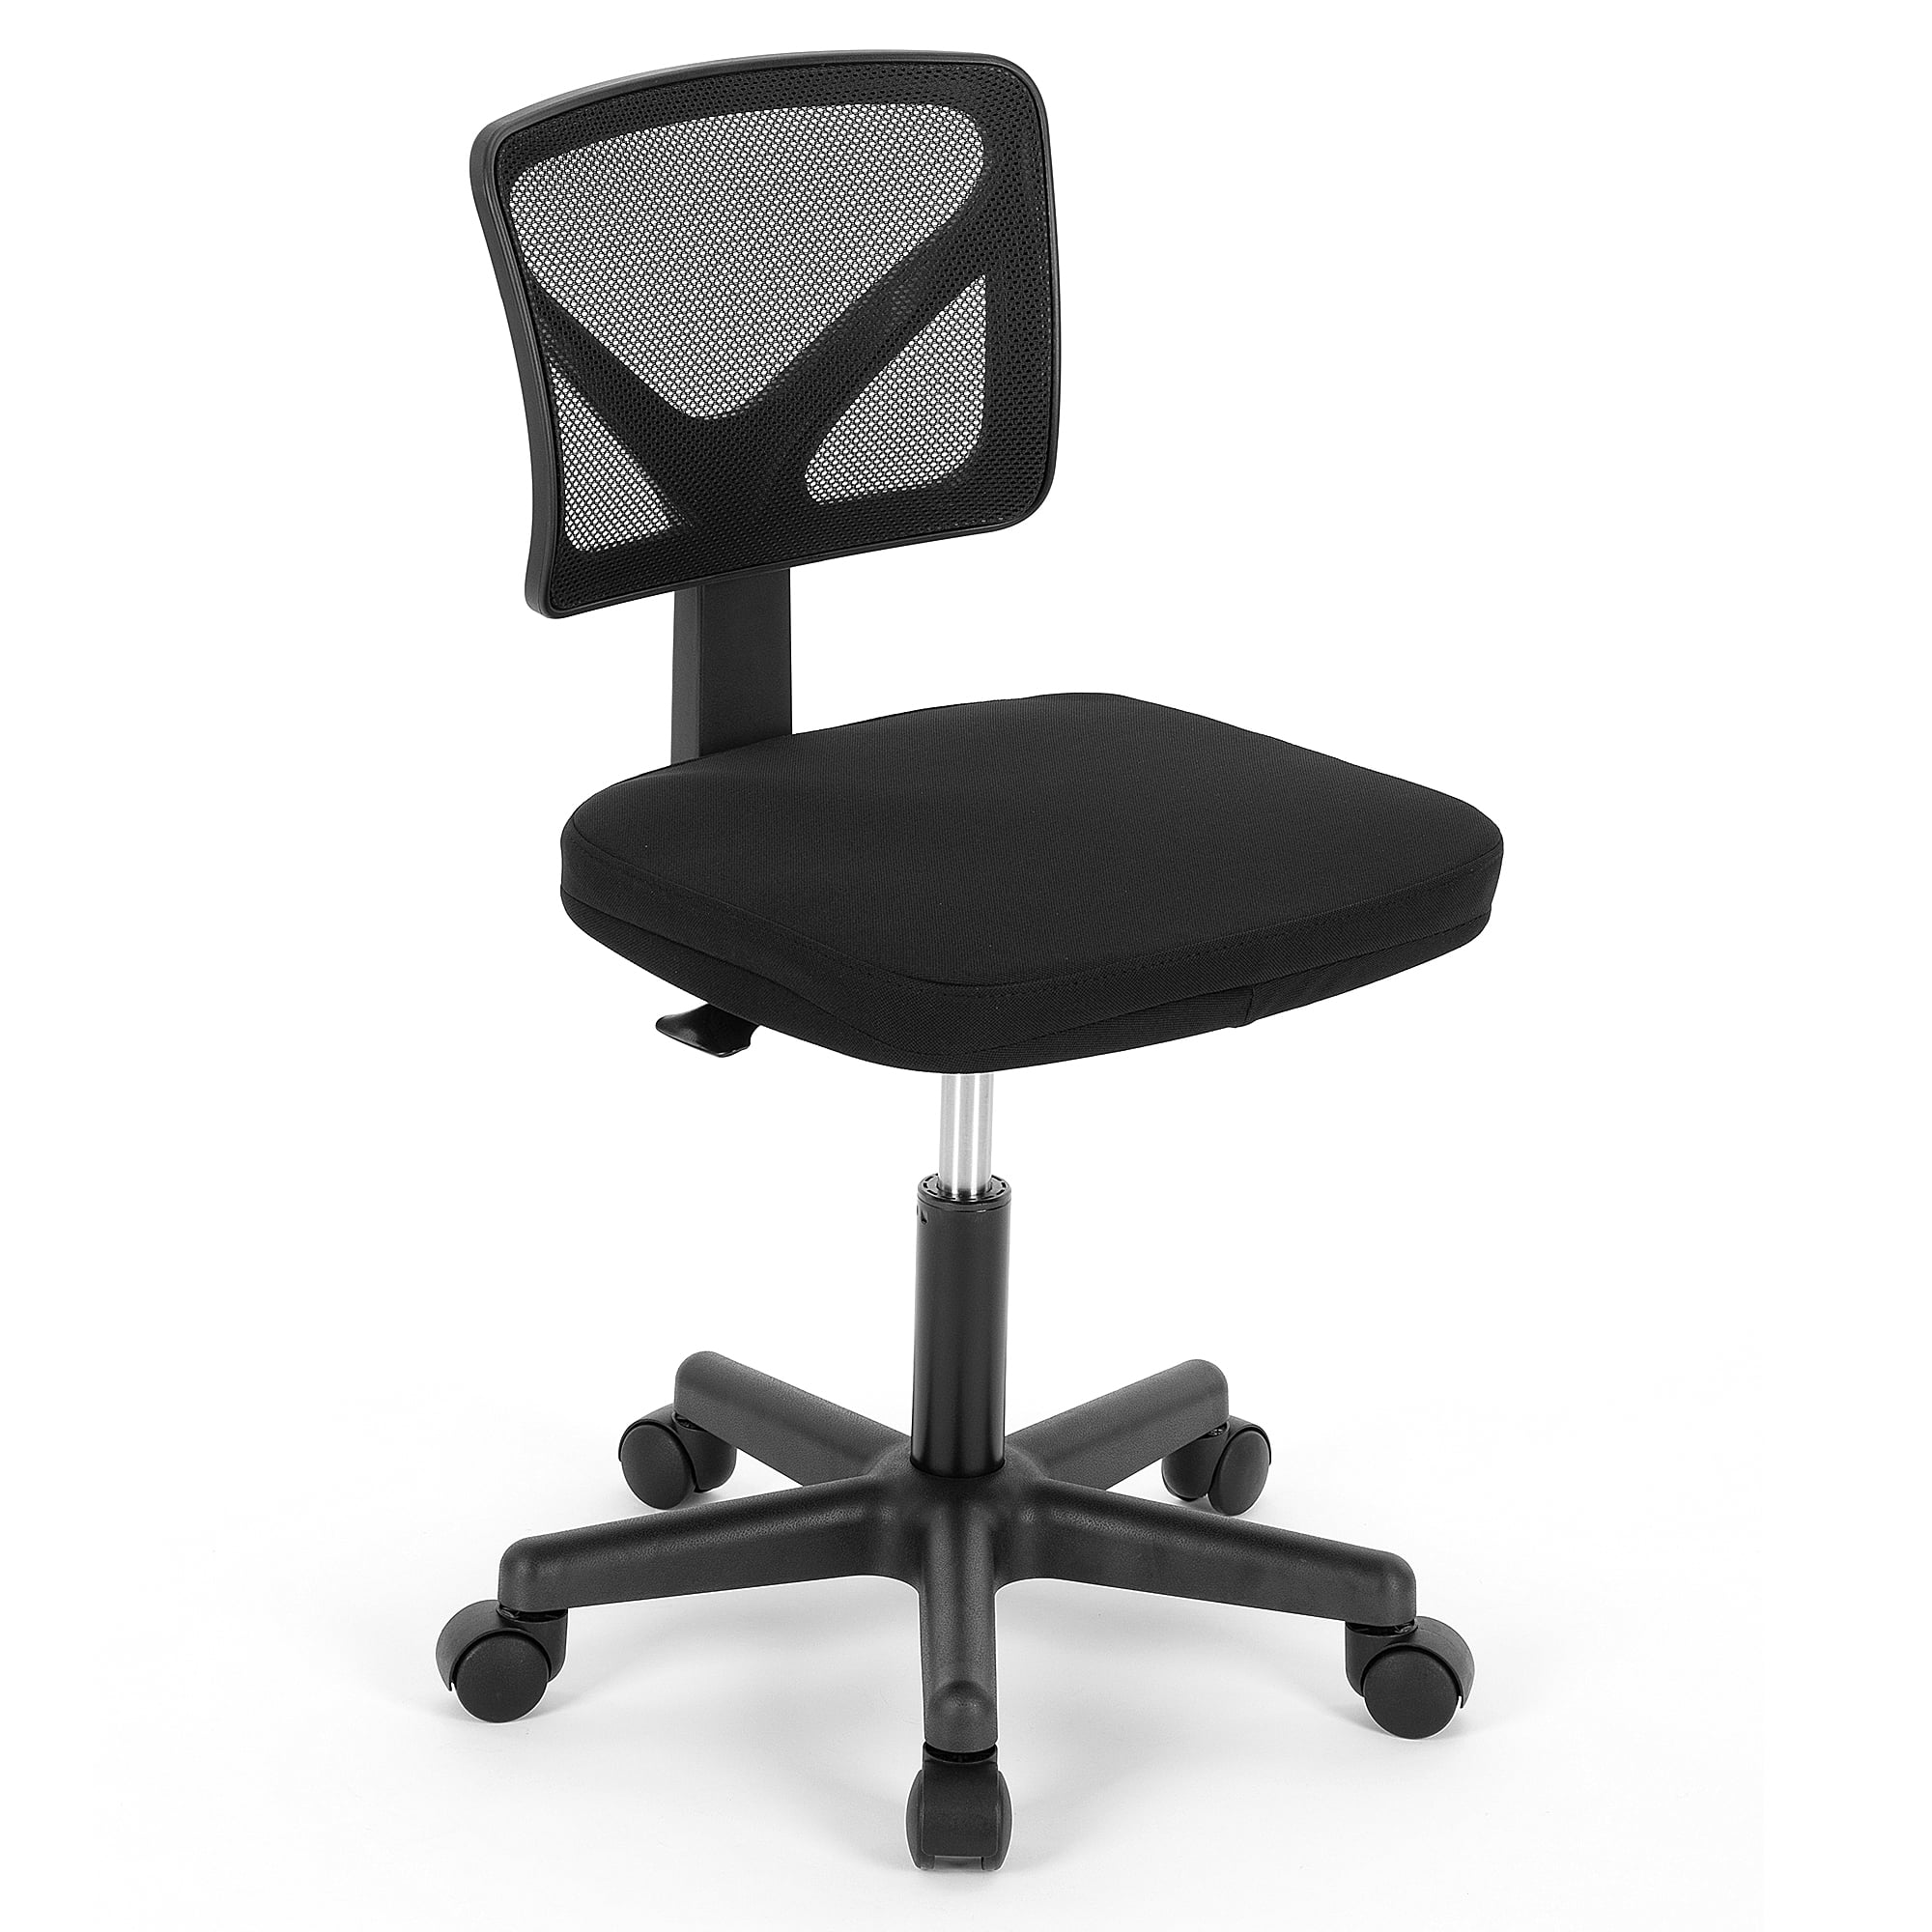 Steelcase Uno Conference Chair - Black